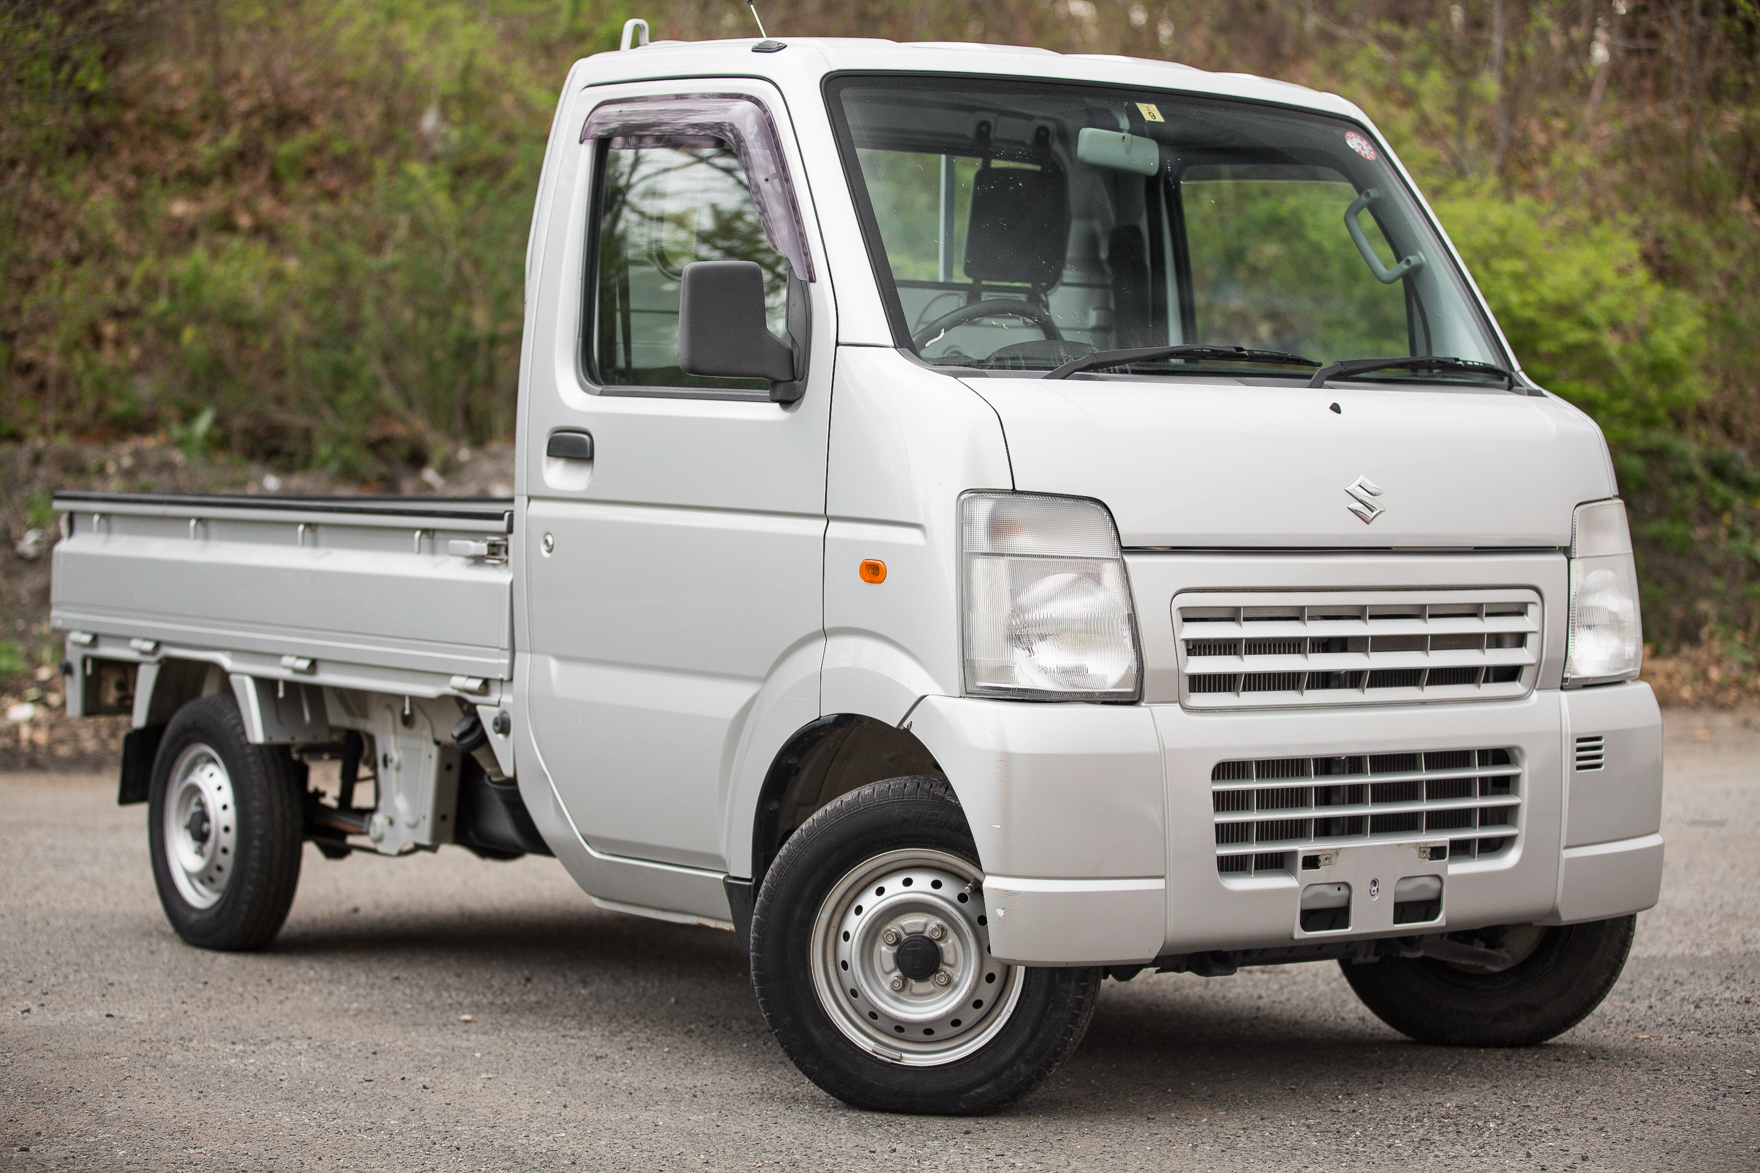 2009 Suzuki Carry Off Road - Available for $12,000